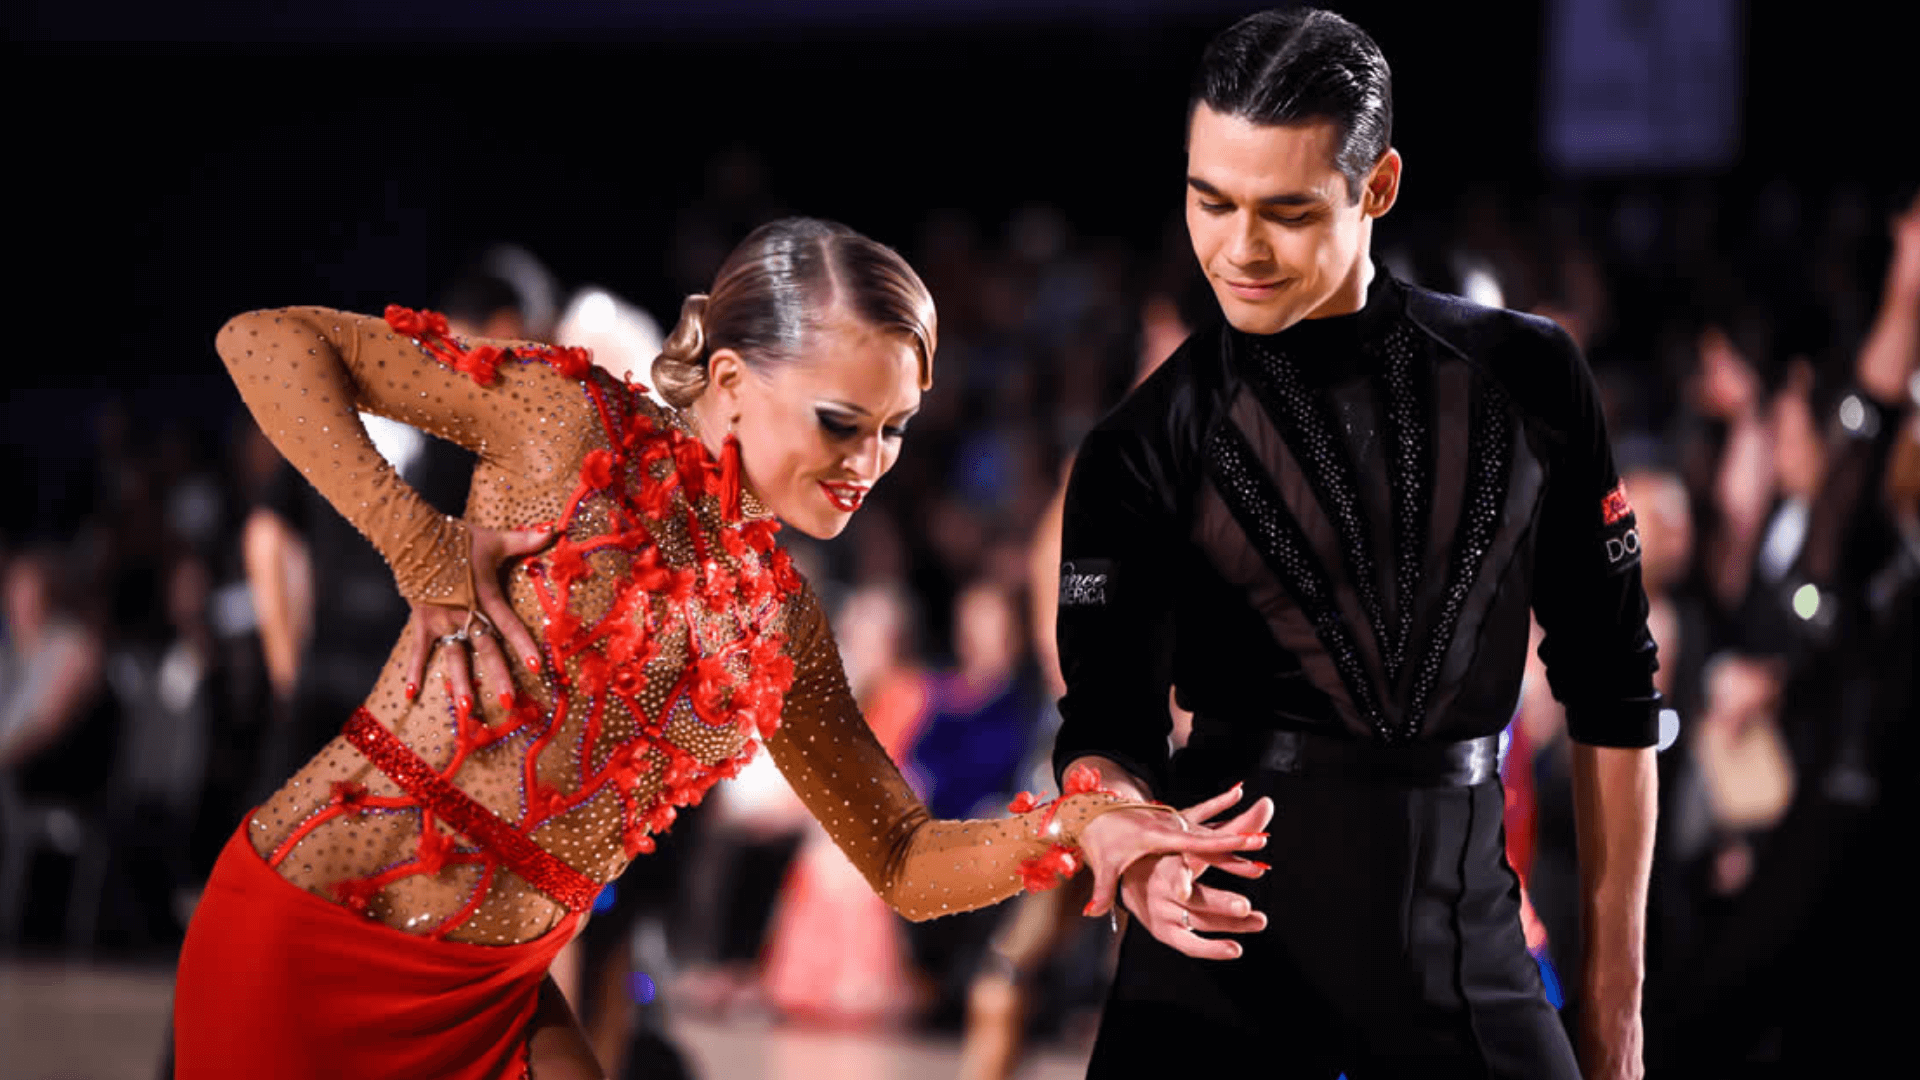 Image for the blog: The Difference Between American and International Style Ballroom Dance